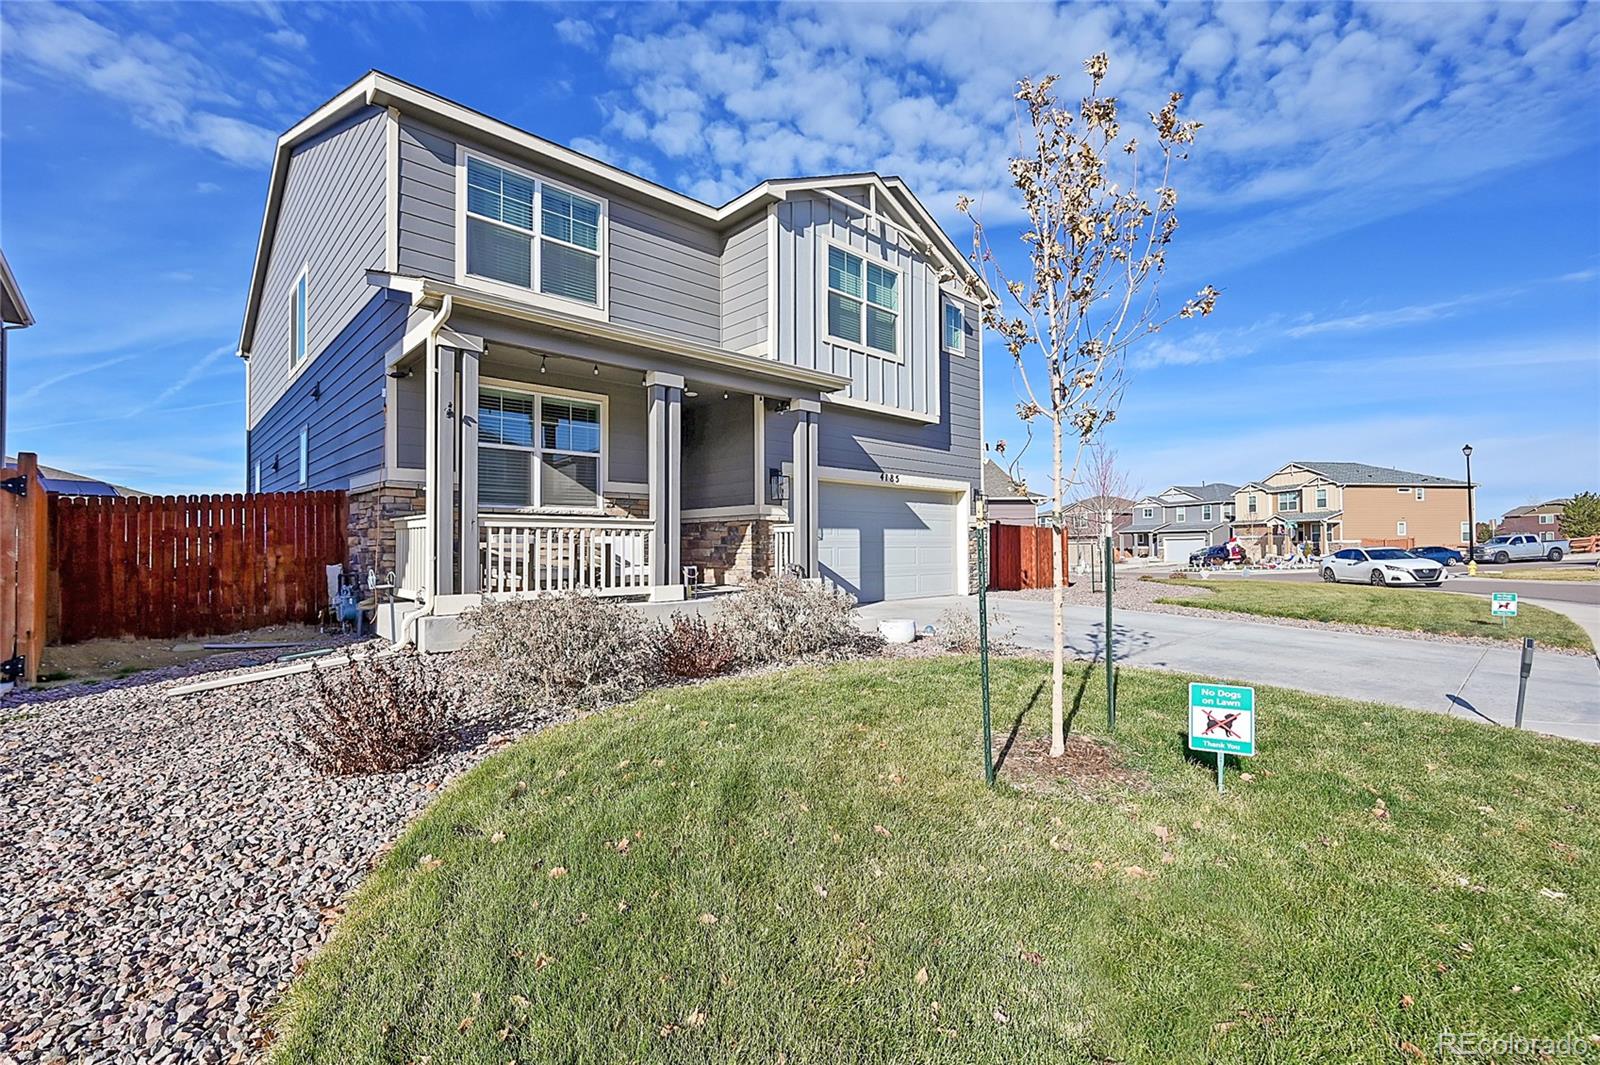 4185 s netherland circle, aurora sold home. Closed on 2024-02-20 for $738,000.